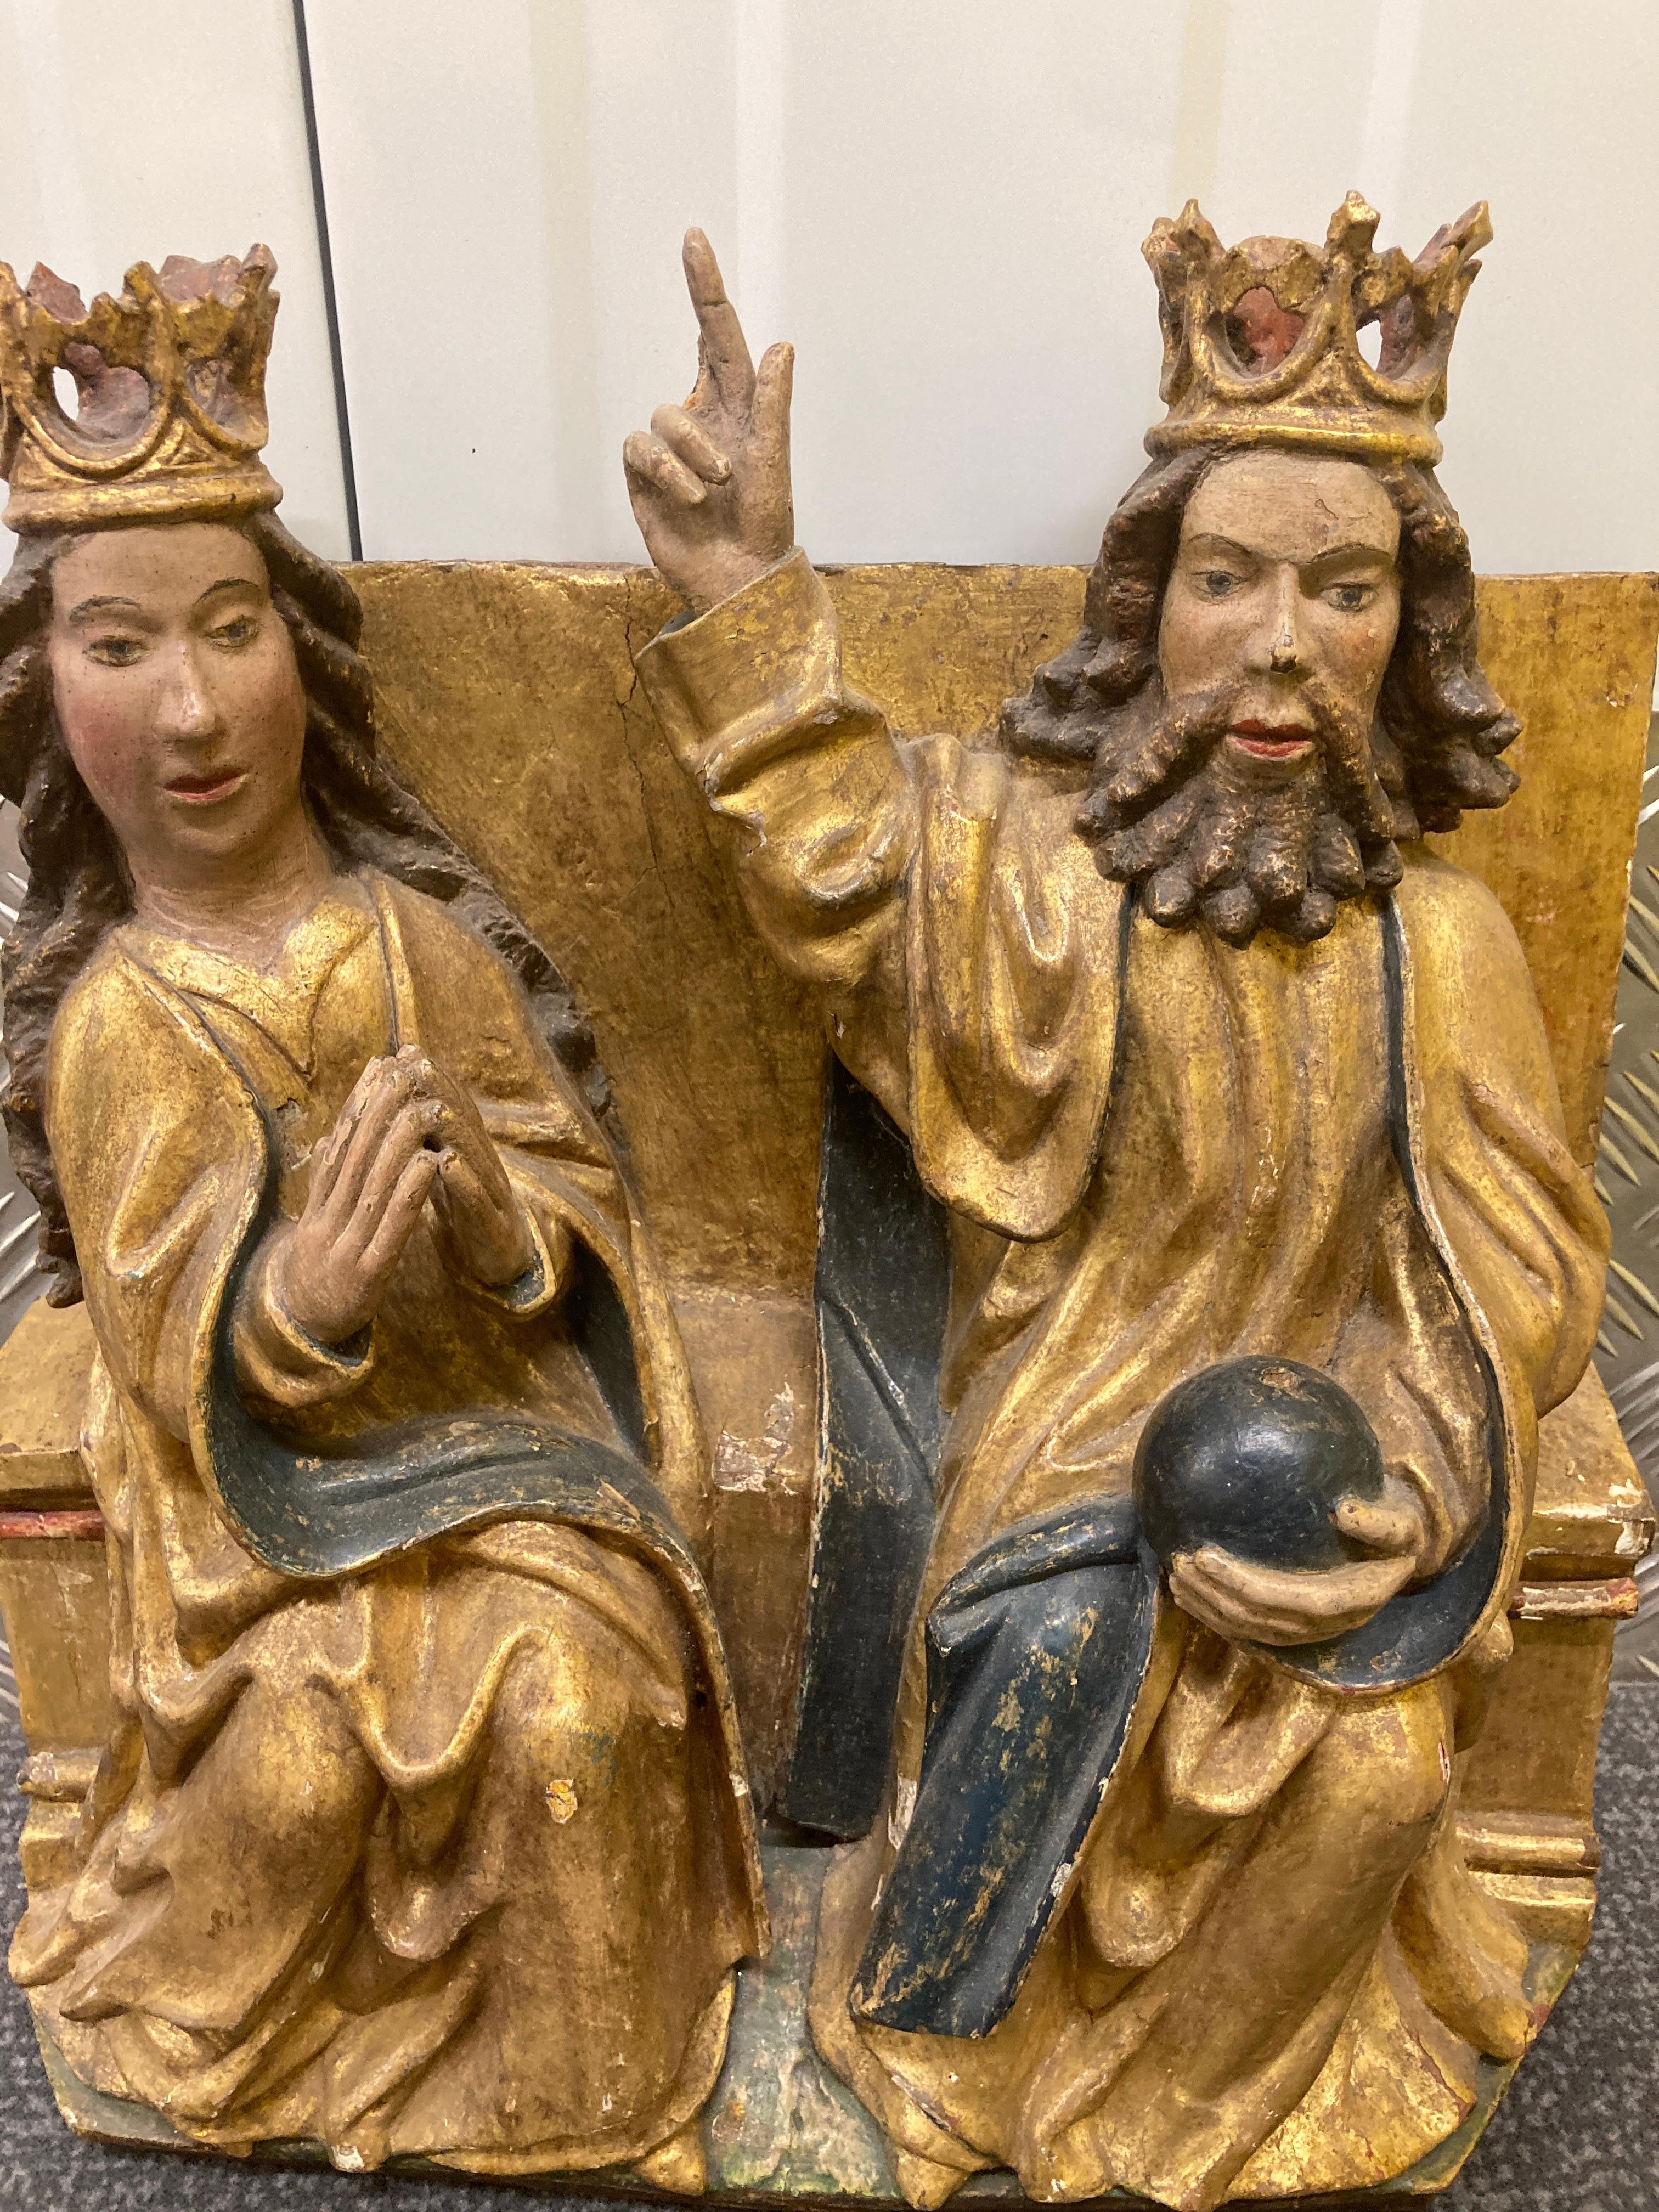 A 16th Century Giltwood and Polychromed Carved Group depicting God and Mary seated on a plinth.